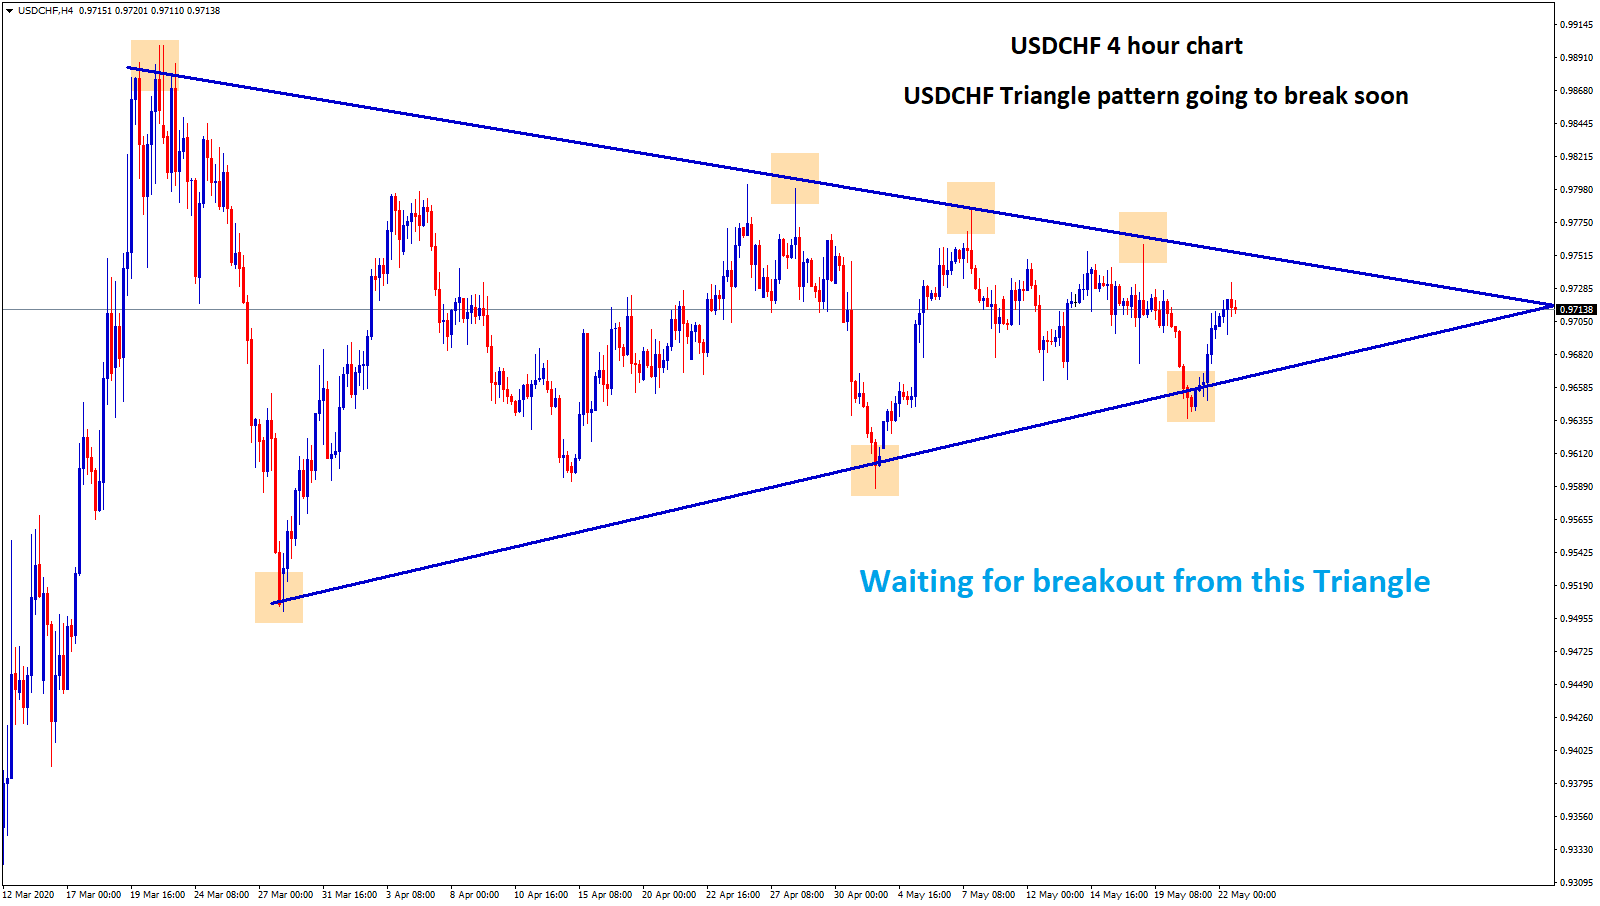 USDCHF triangle pattern going to break soon